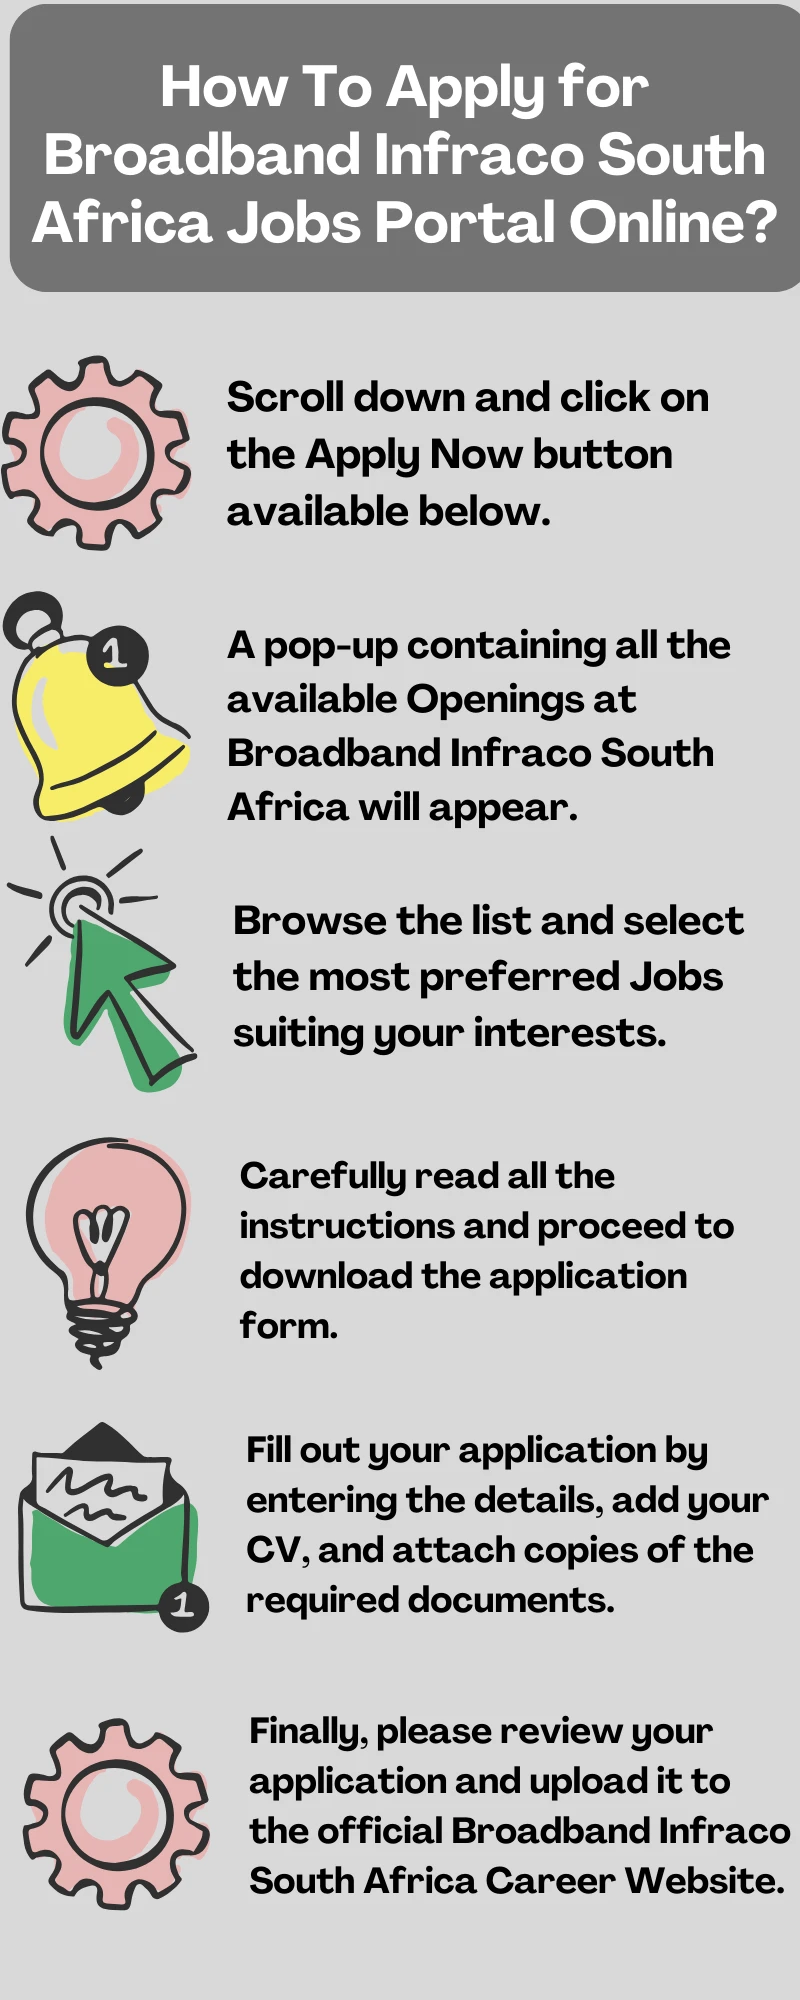 How To Apply for Broadband Infraco South Africa Jobs Portal Online?